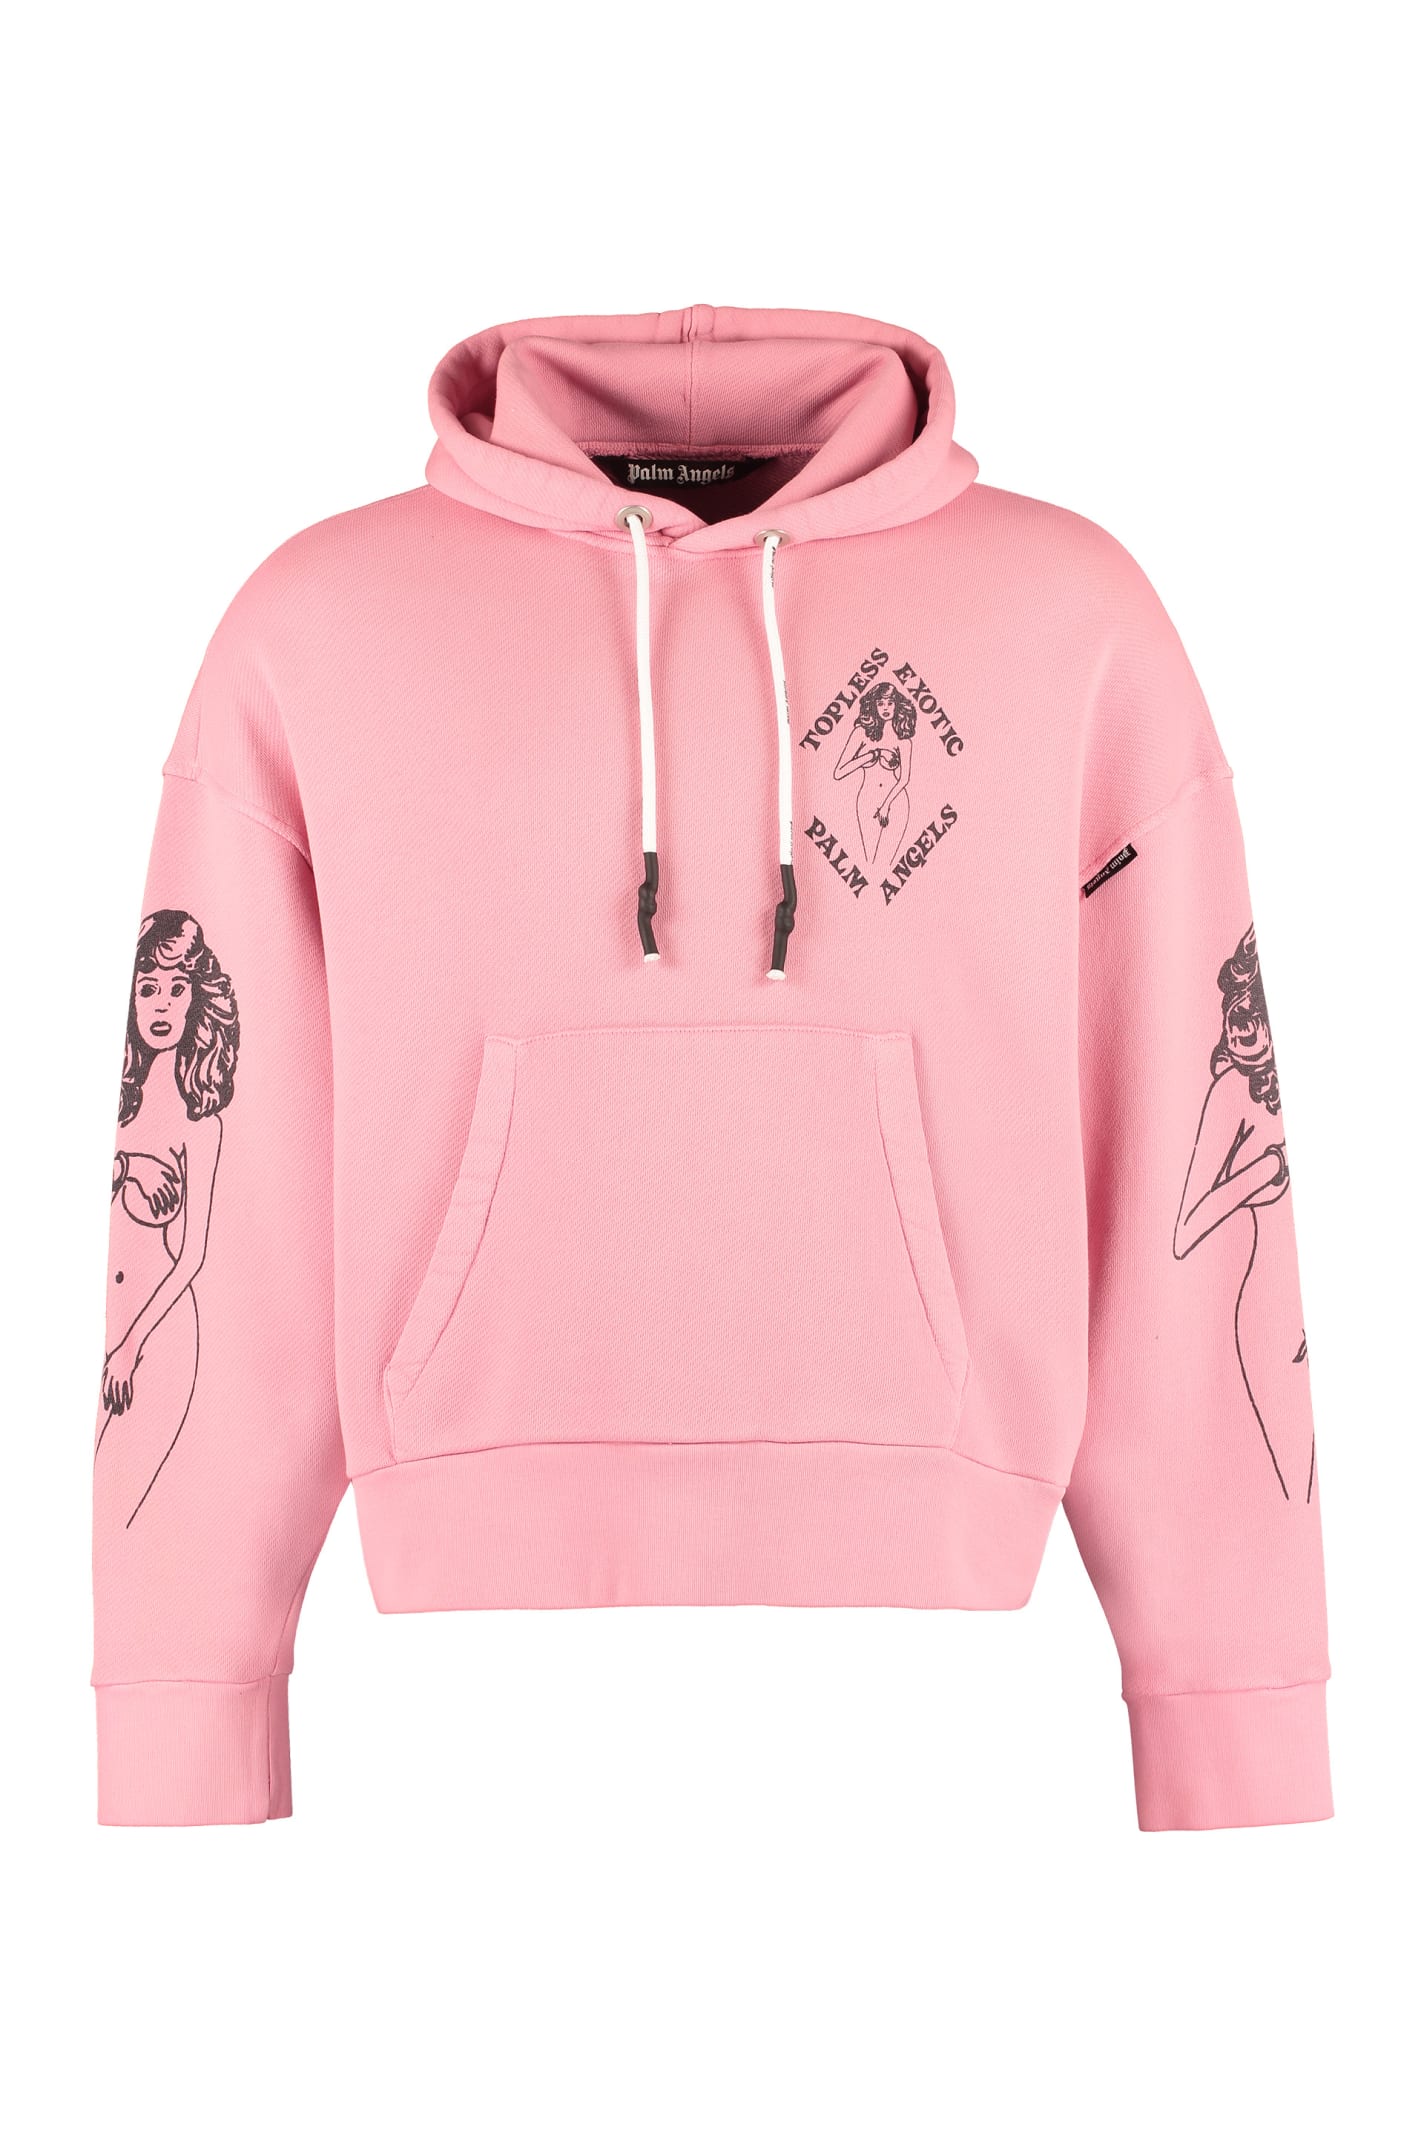 Palm Angels Oversize Hoodie